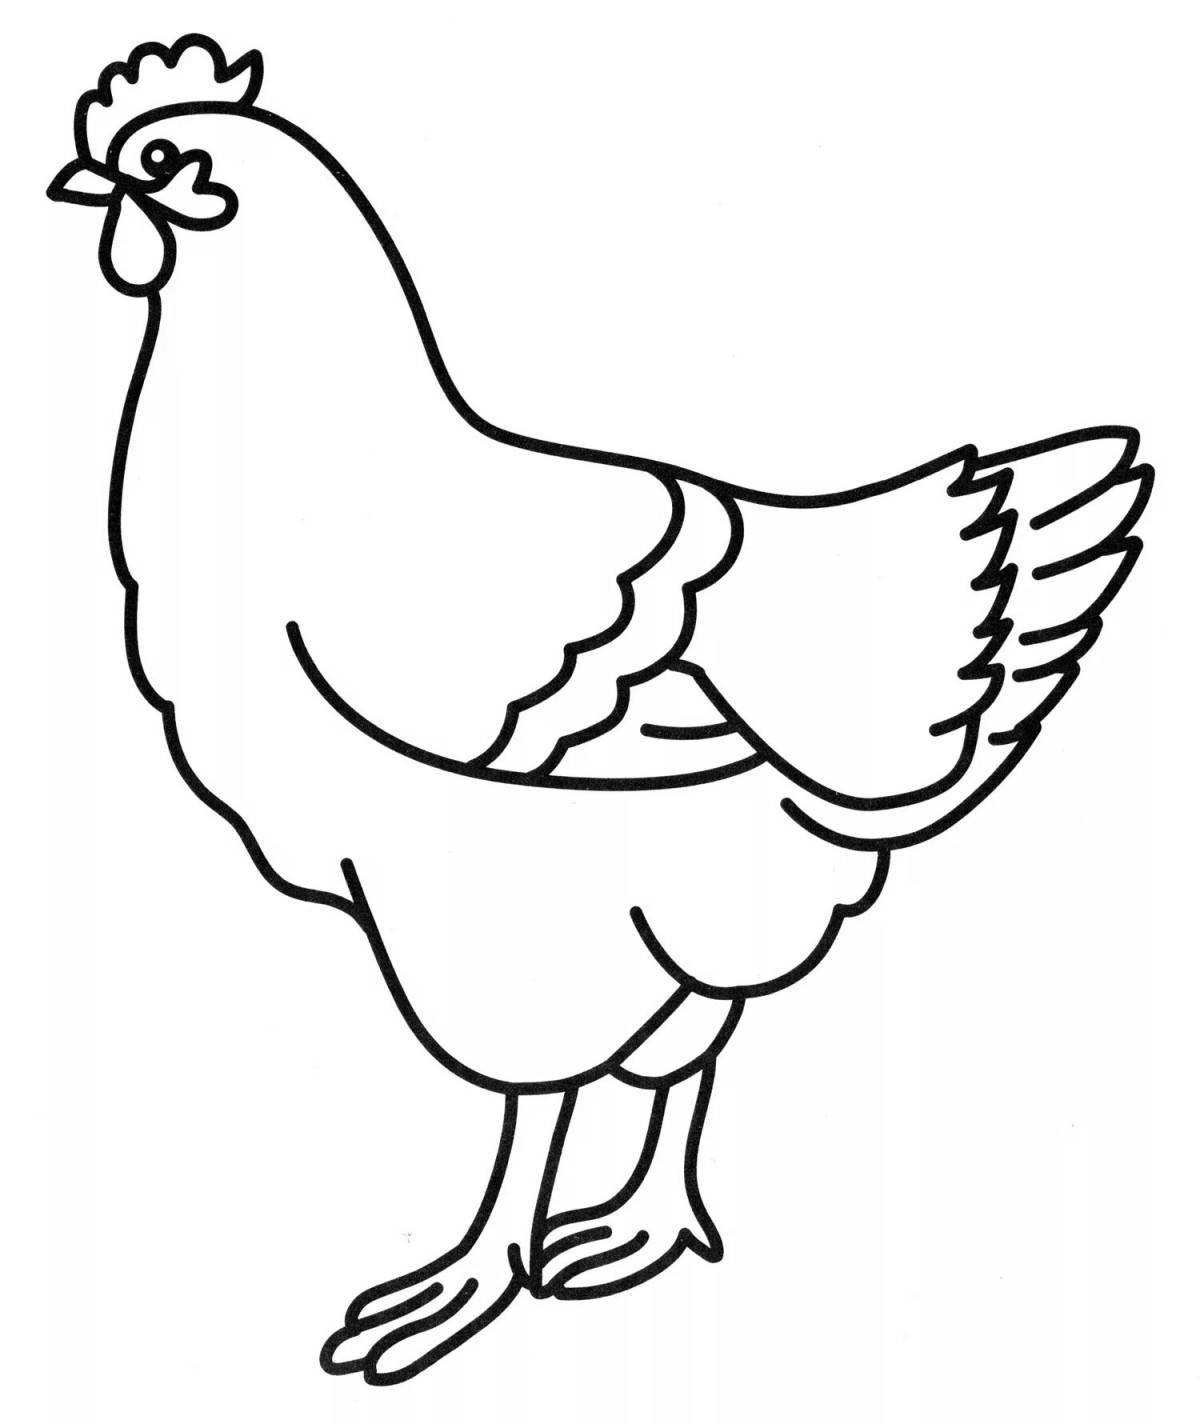 Adorable chicken drawing for kids